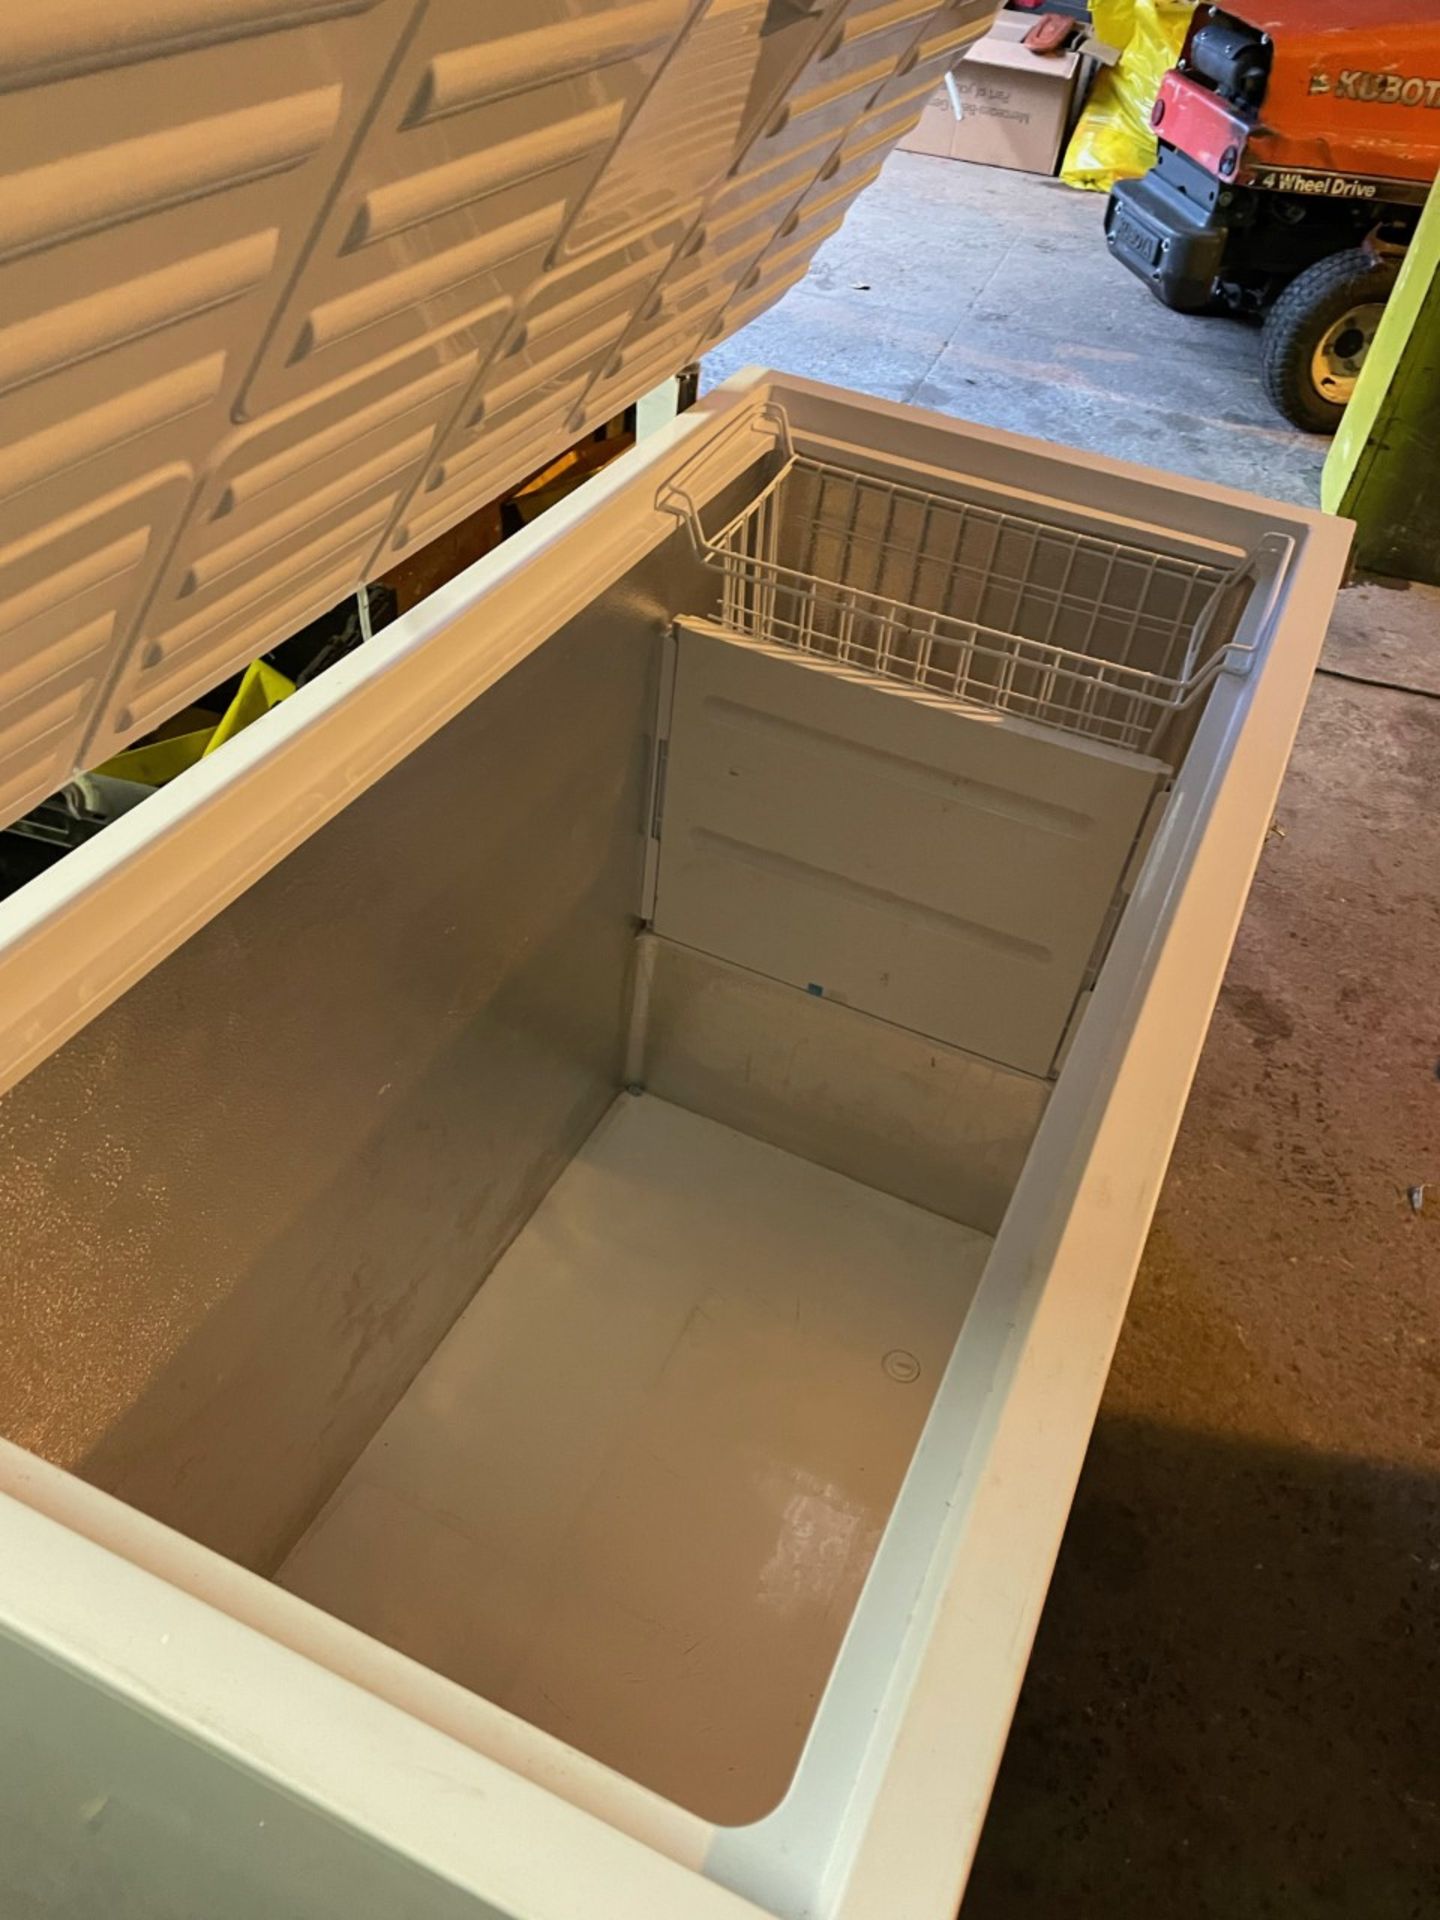 C pentane chest freezer in good condition - Image 2 of 2